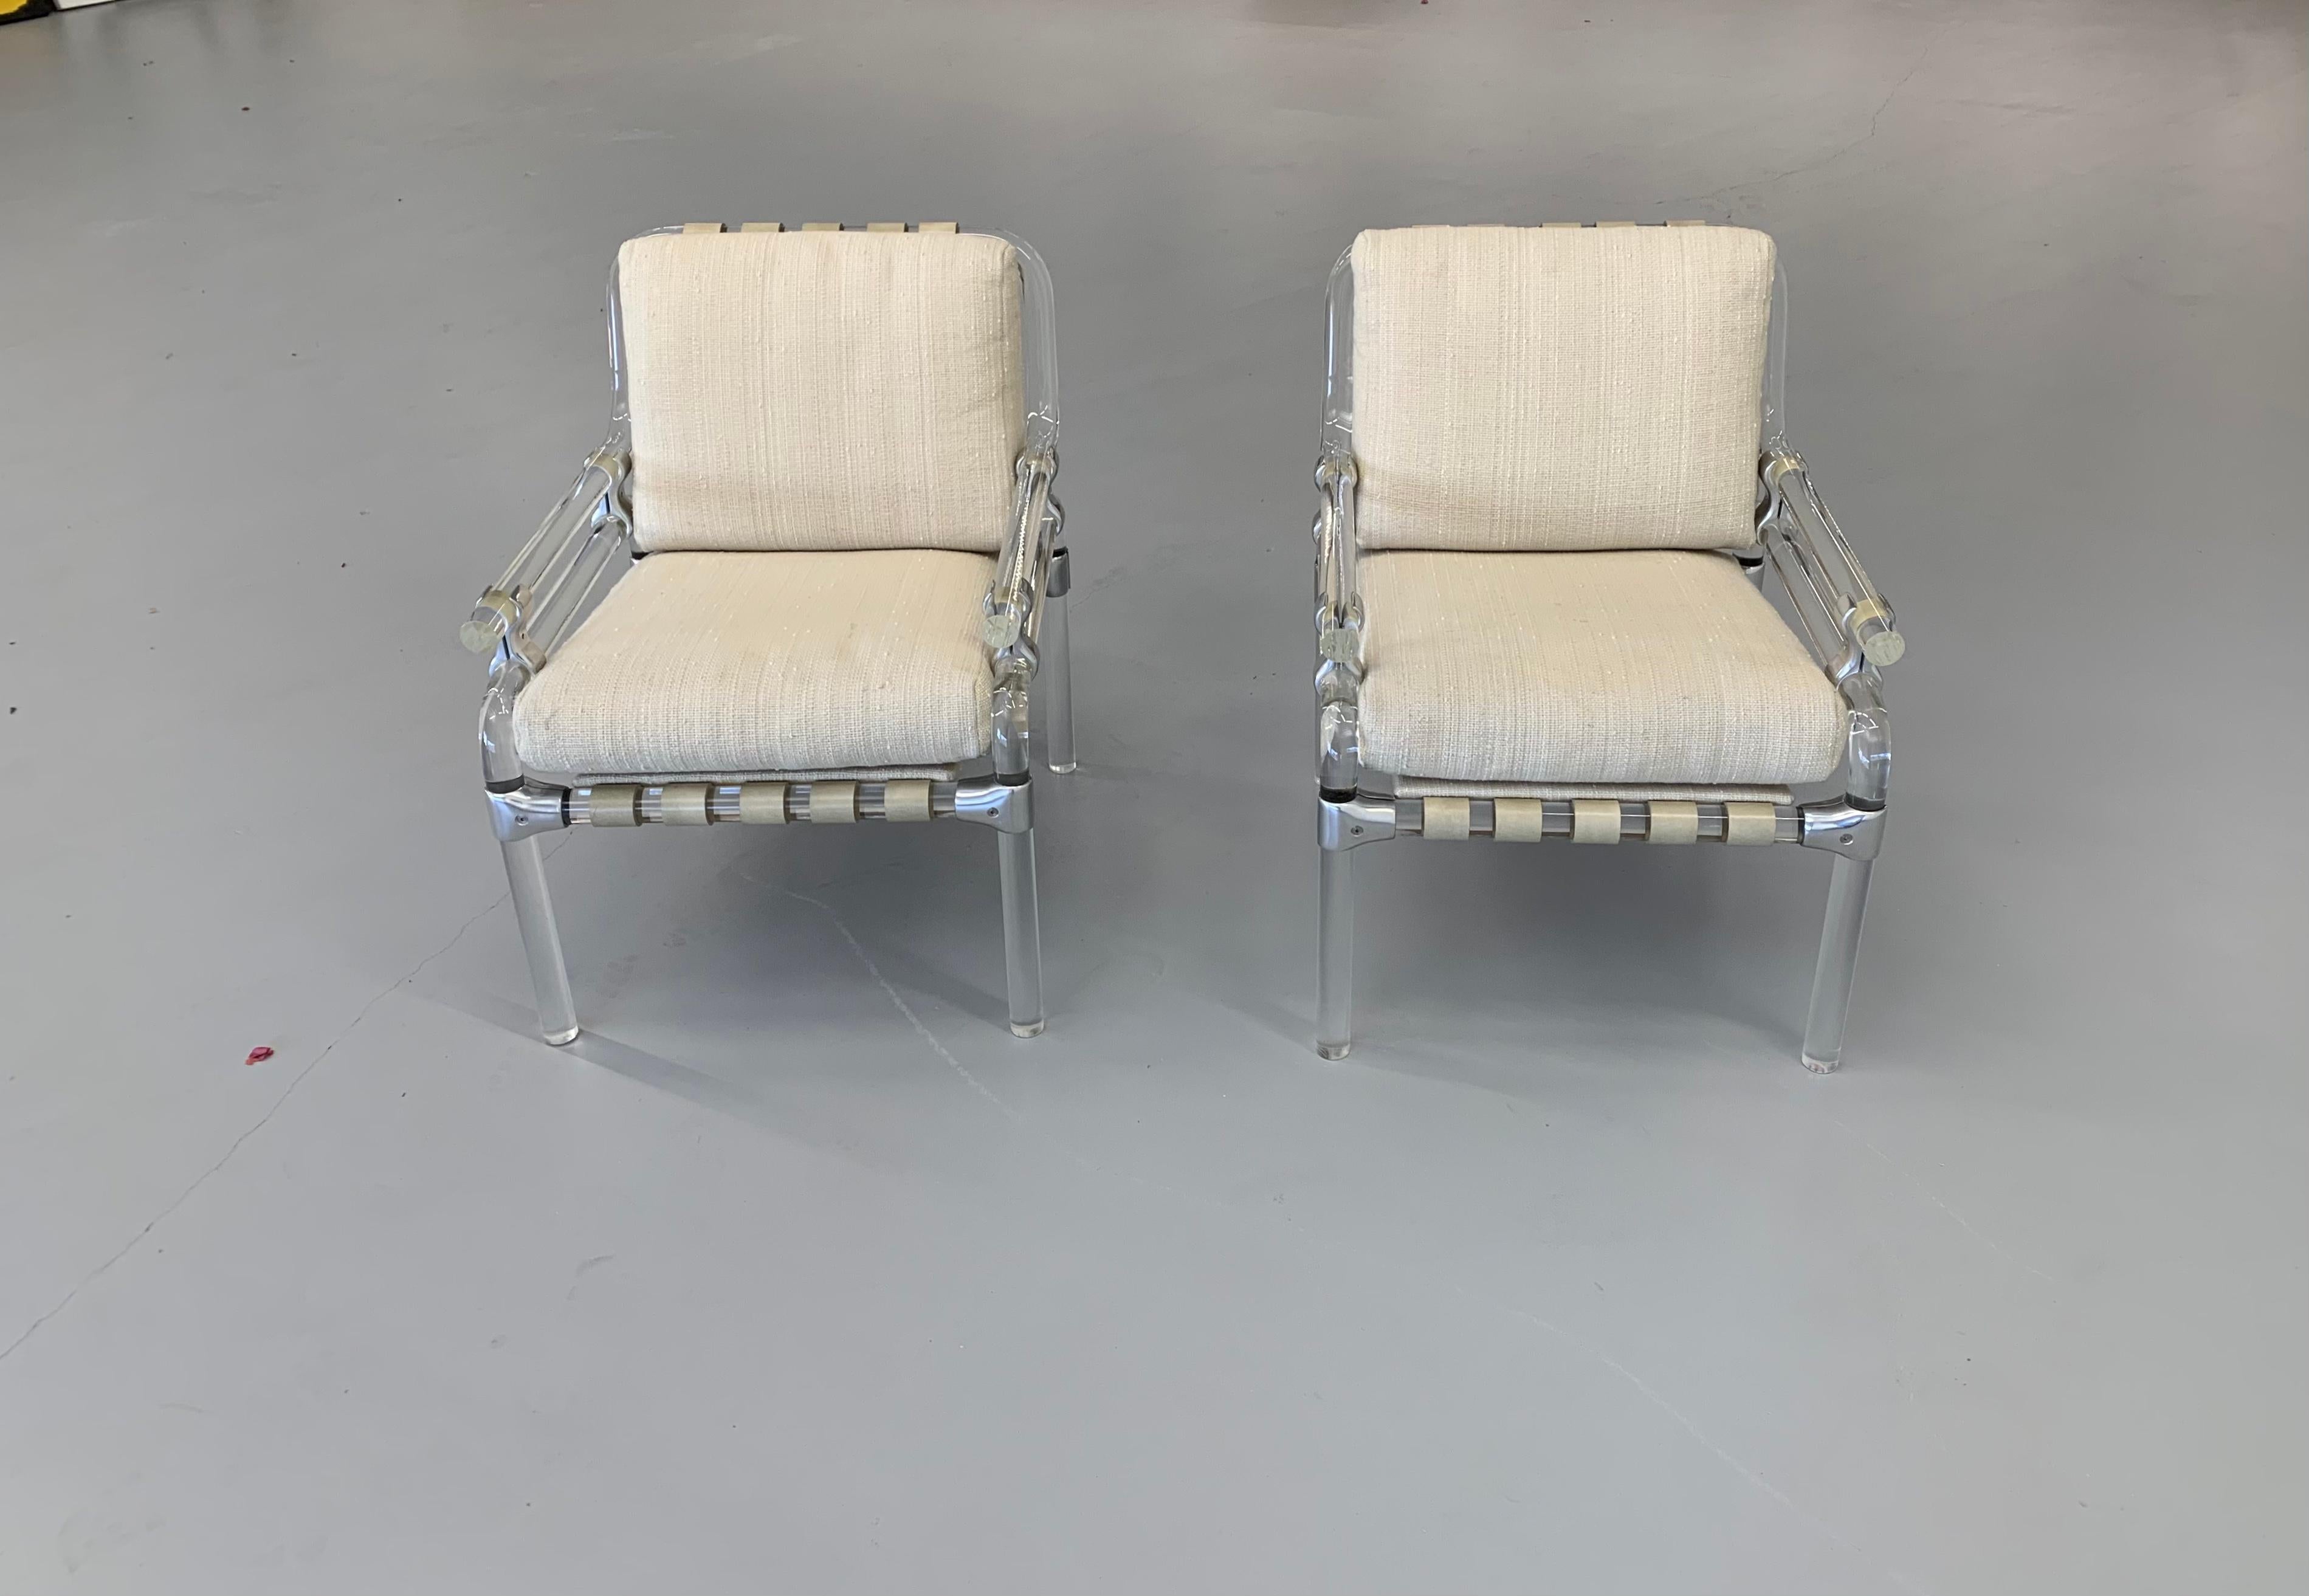 A nice pair of lucite and metal chairs by Jeff Messerschmidt. They are Pipeline 1000 chairs and numbered 37 and 38, 1973. The leather straps are original and the cushions are of recent vintage and in good condition. Great overall condition for